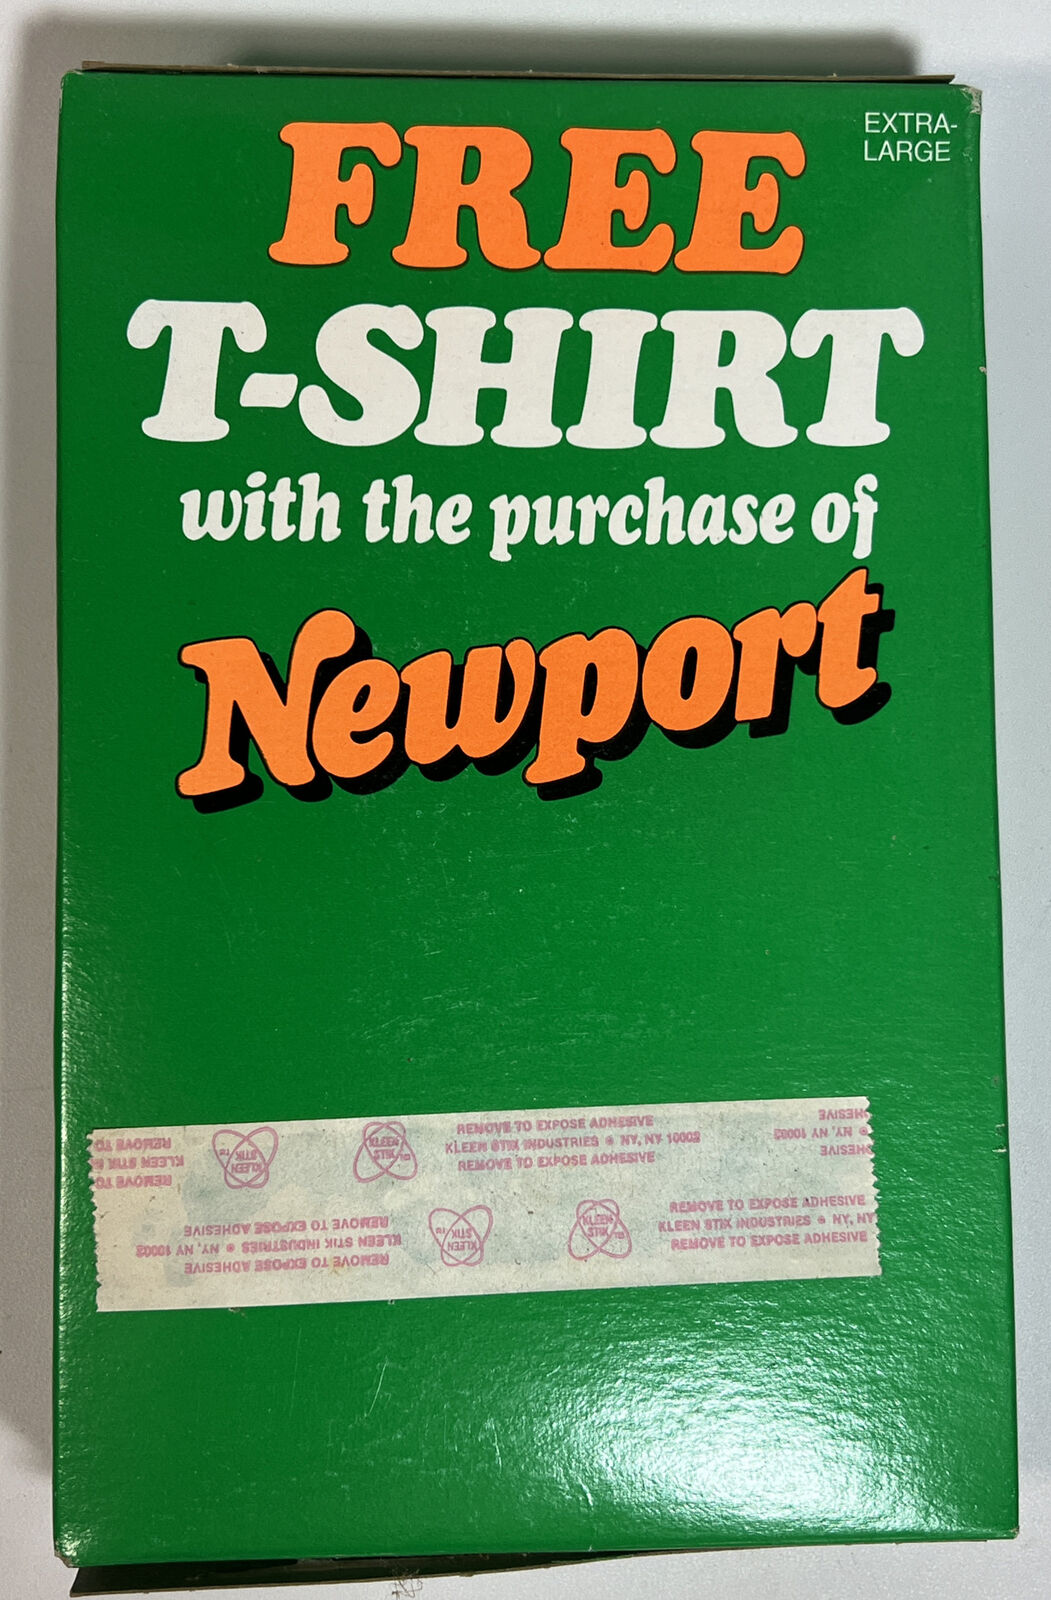 1991 Newport Cigarettes XL Extra Large T-Shirt New In Box Unopened VINTAGE